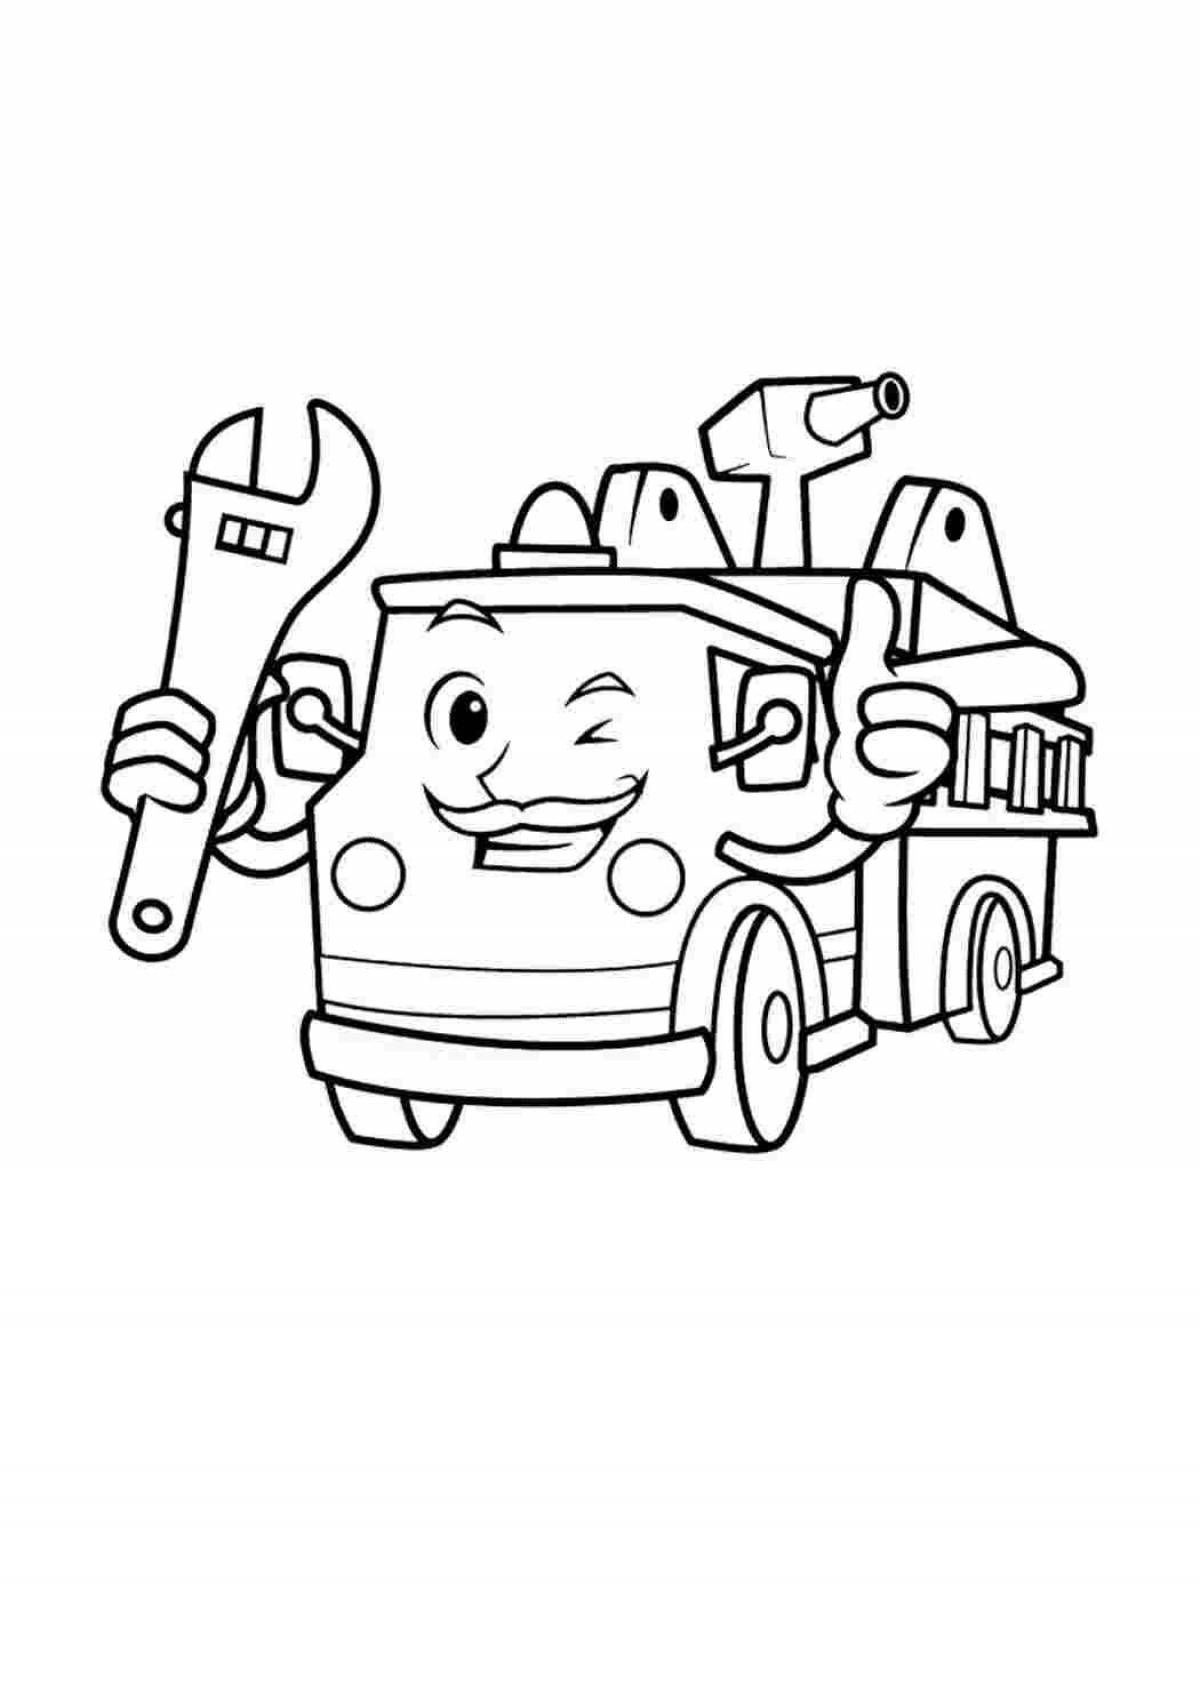 Finley fire truck coloring page